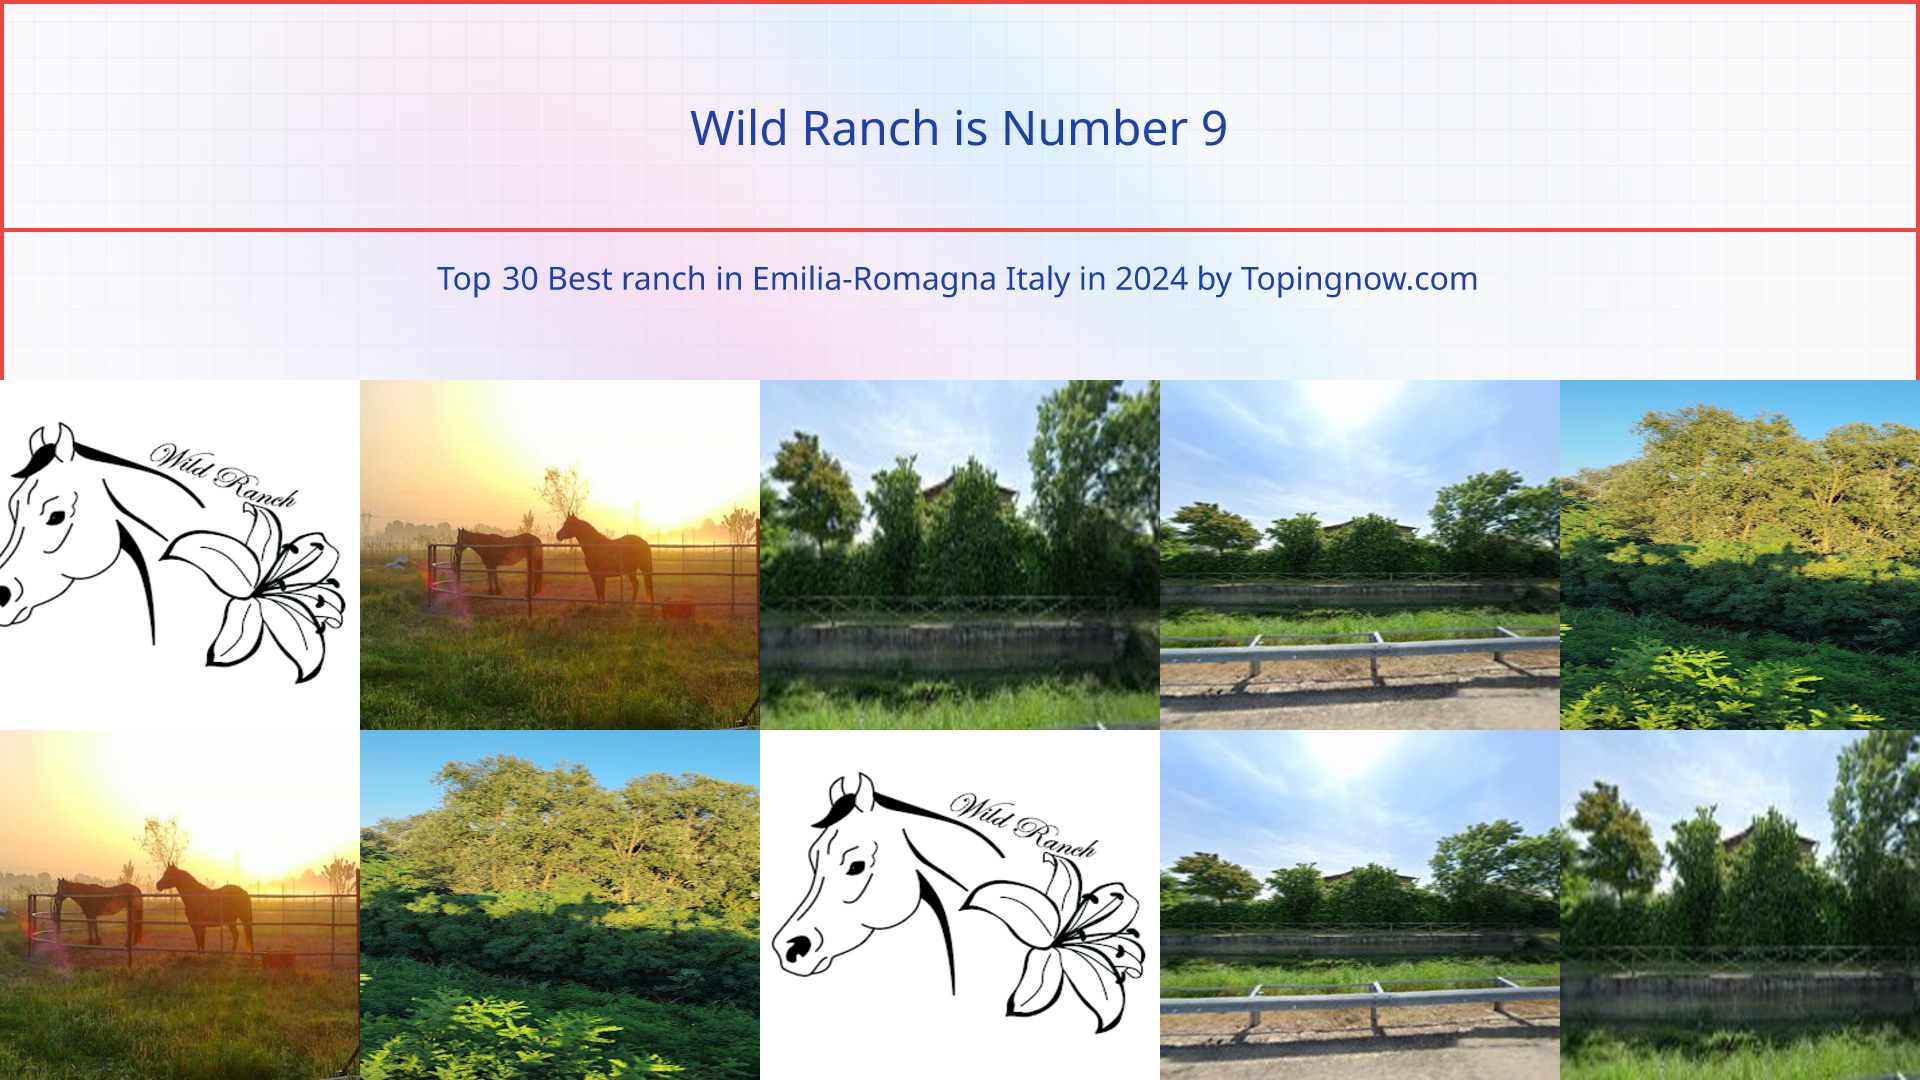 Wild Ranch: Top 30 Best ranch in Emilia-Romagna Italy in 2024